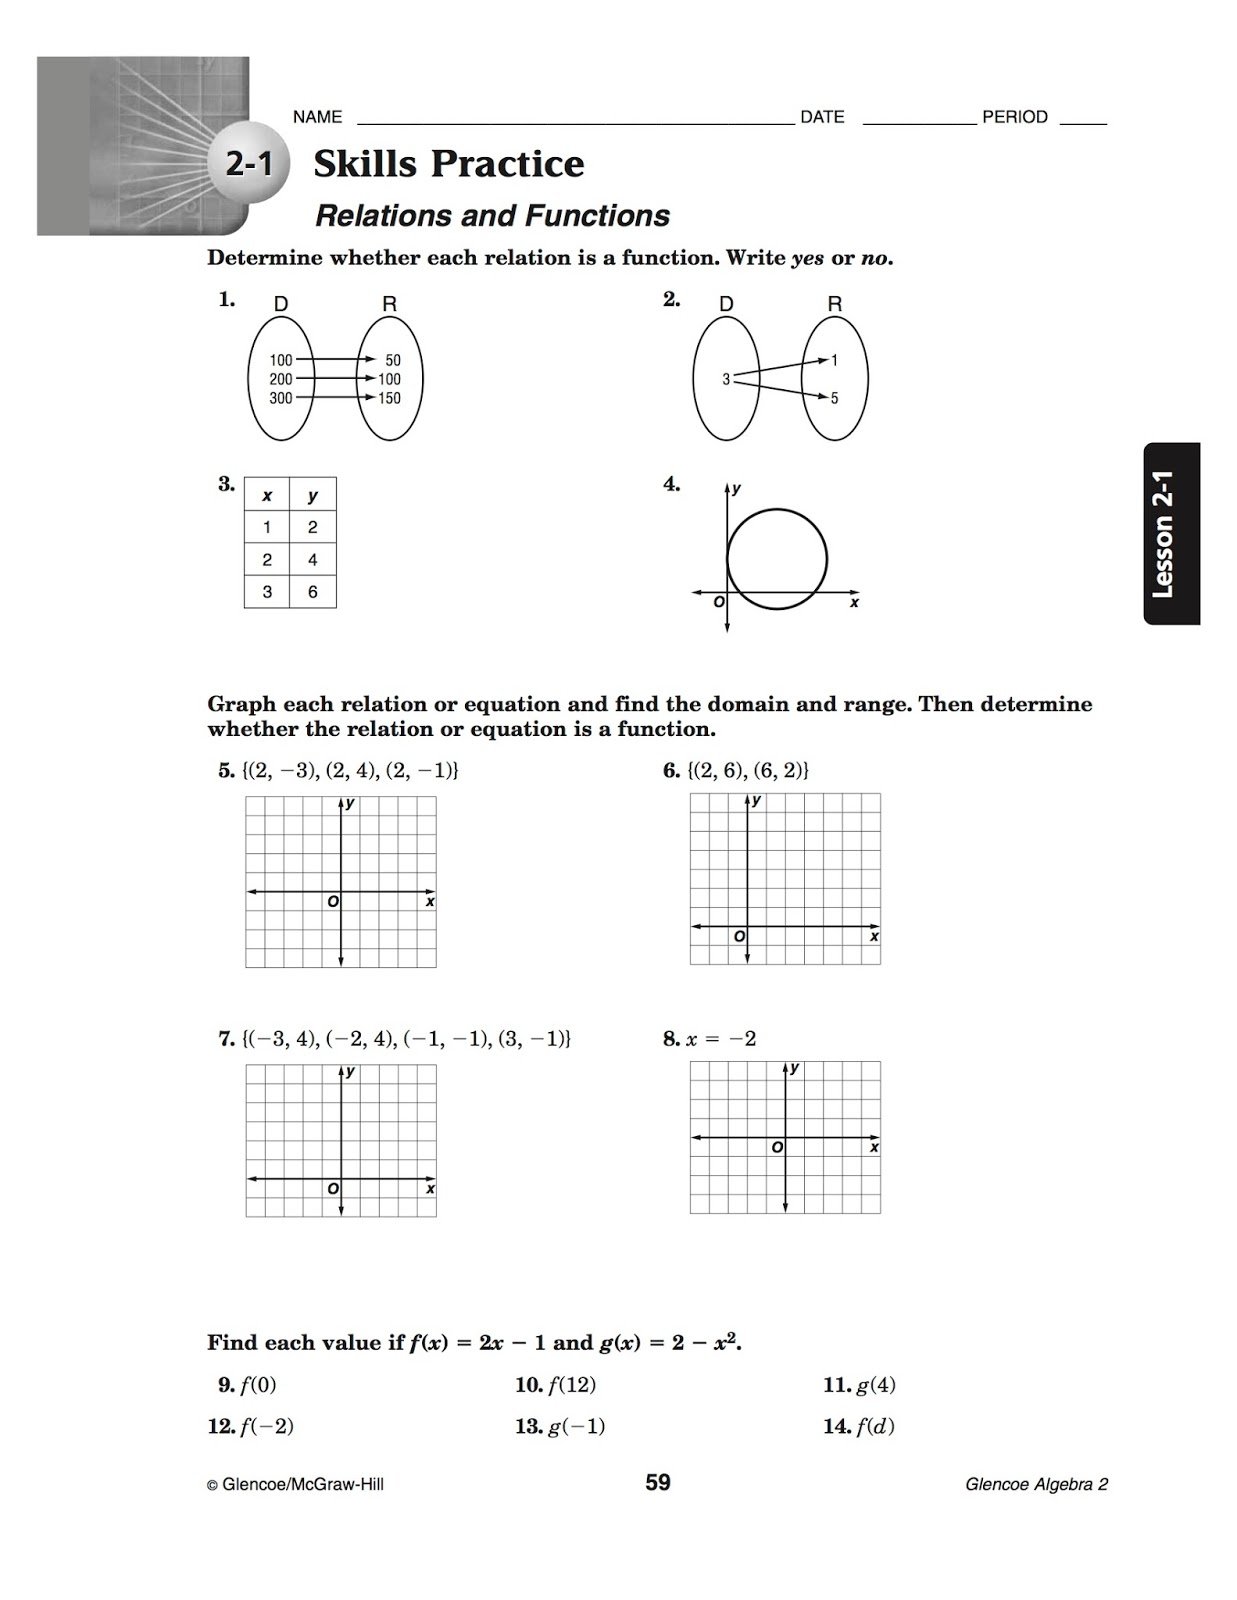 Understanding Relations And Functions Worksheet Answers